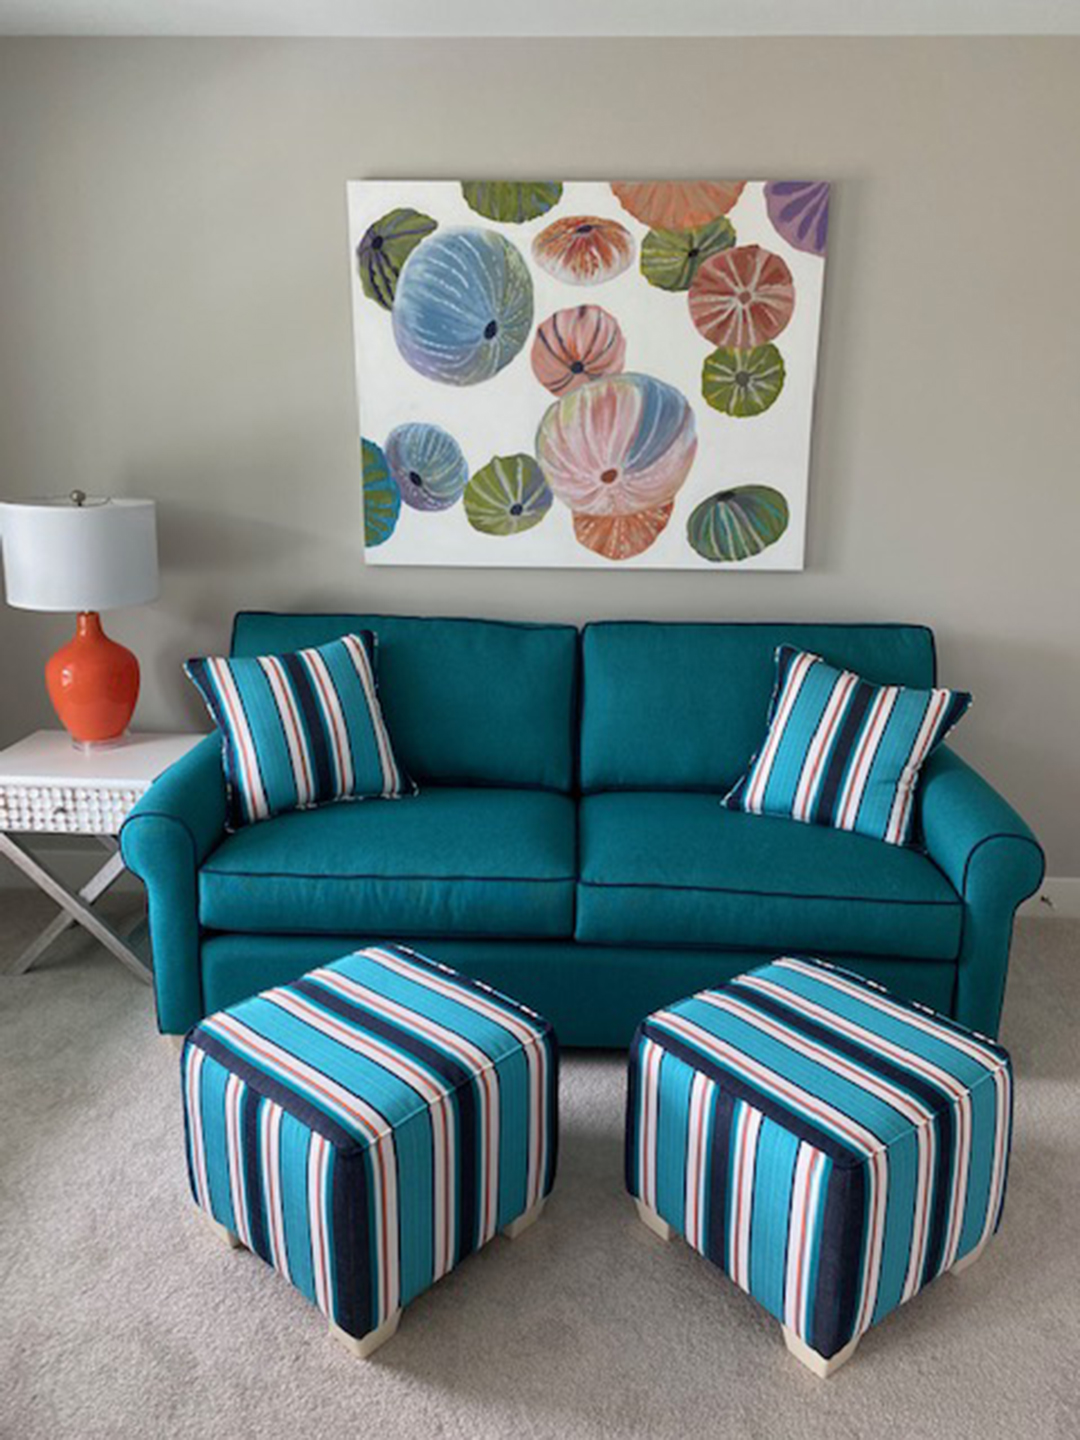 a blue couch and ottoman in a living room